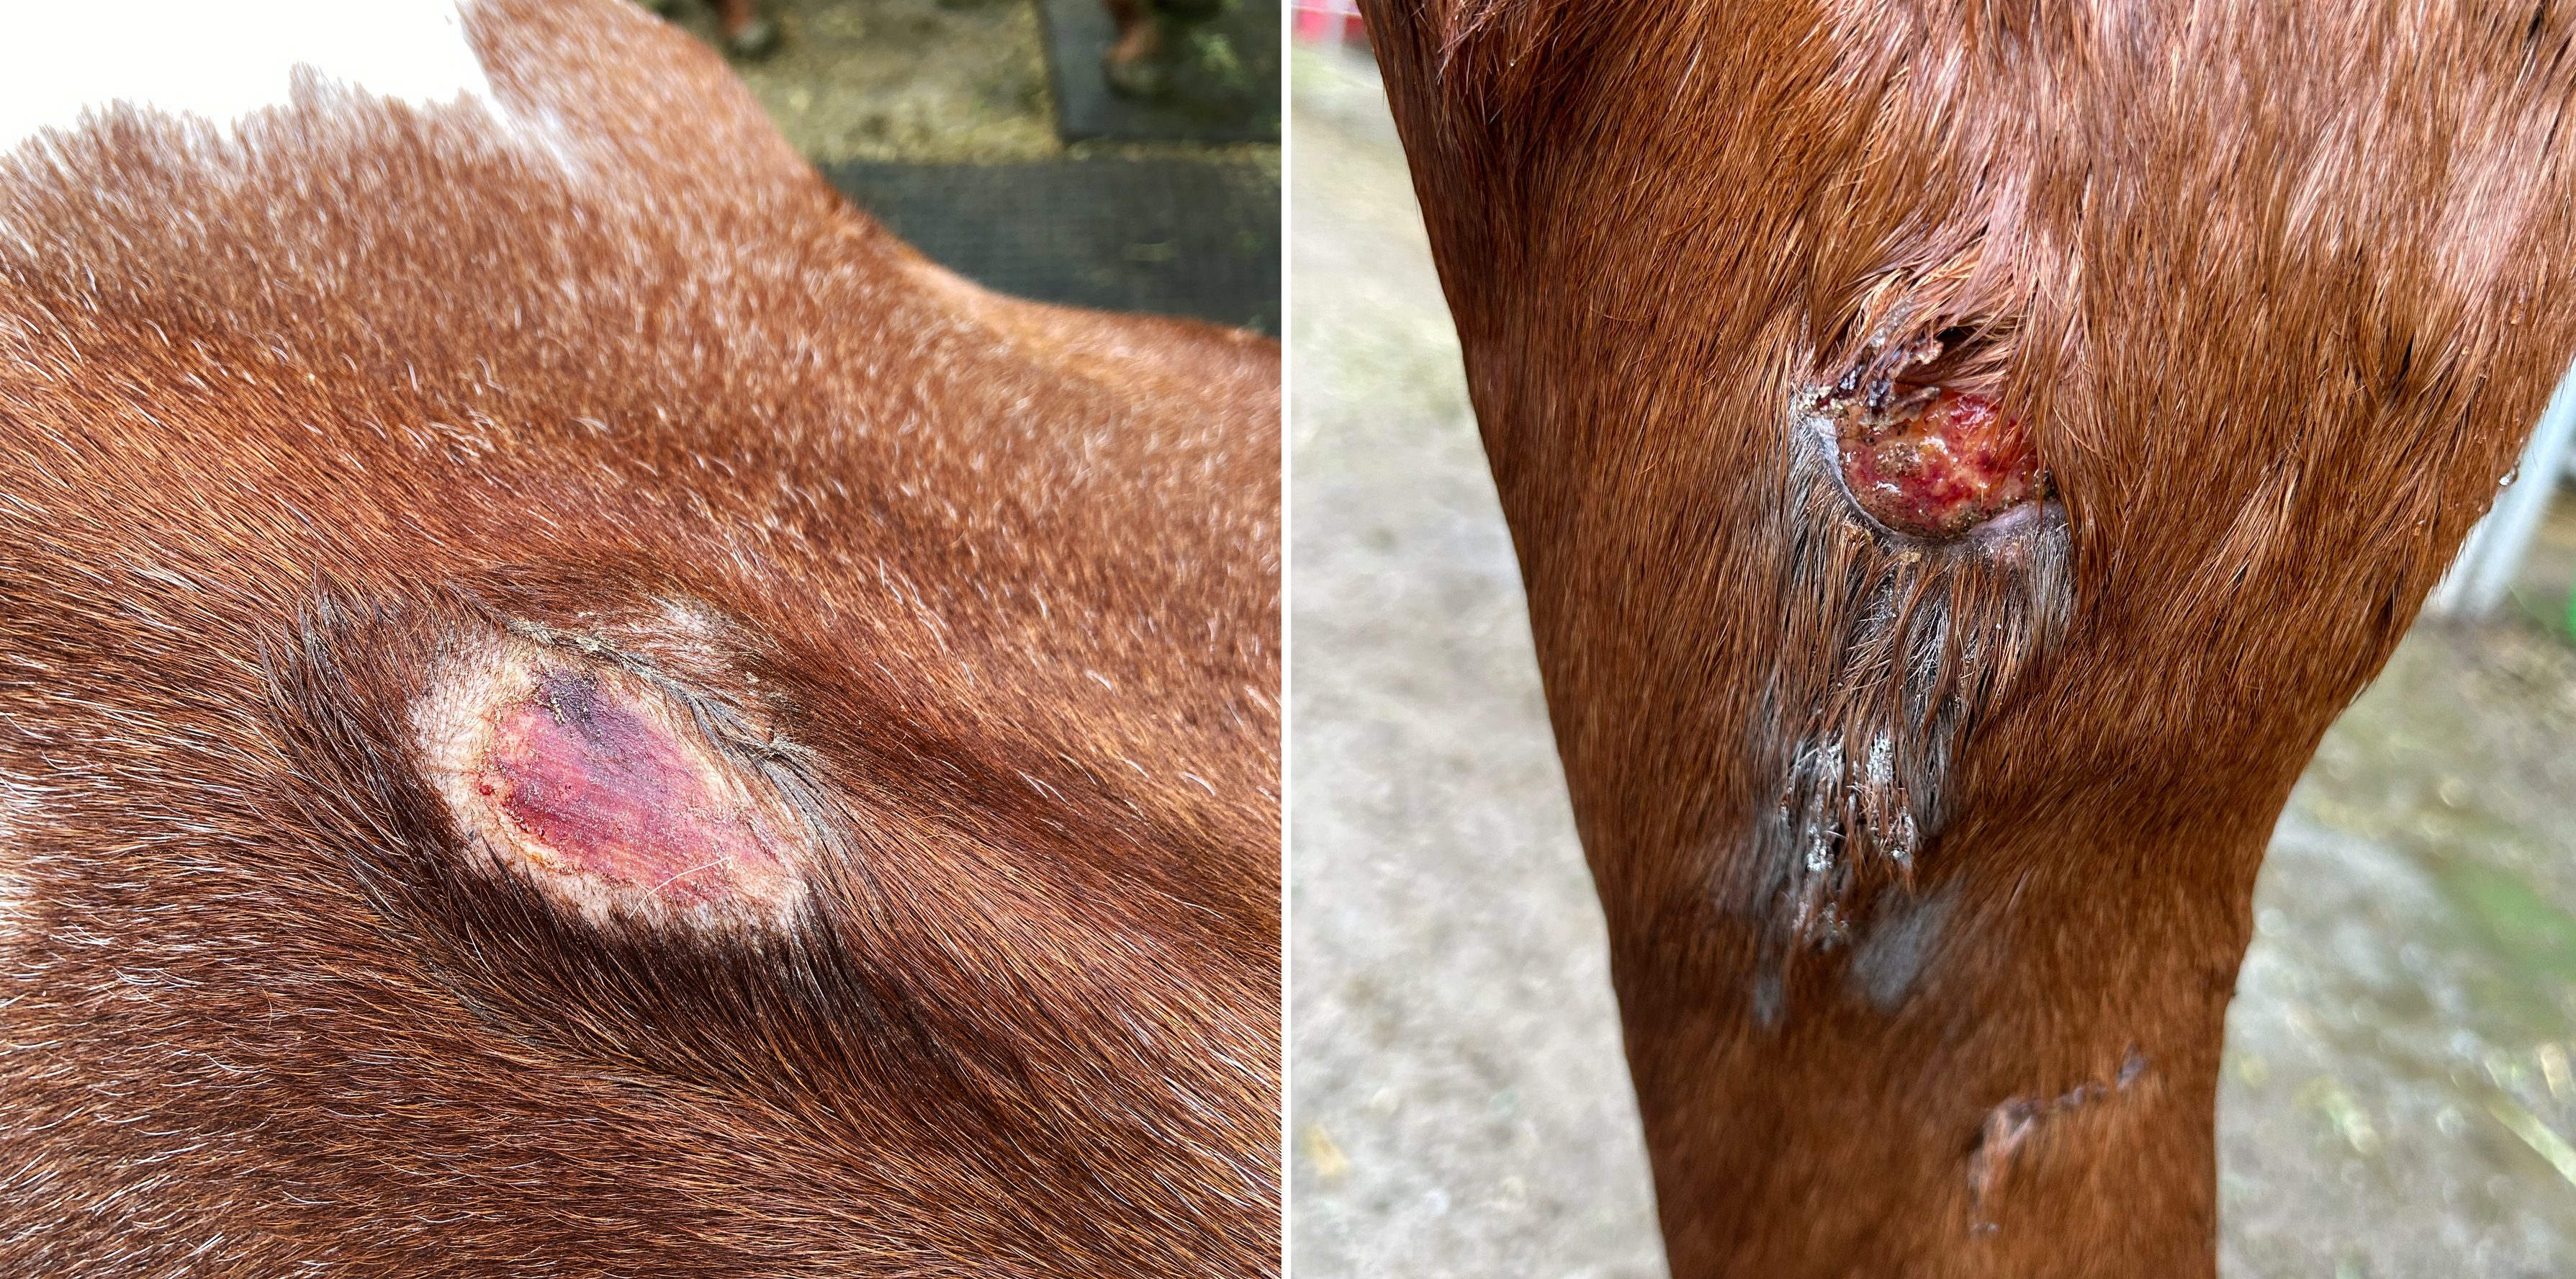 Two close-up images of a horse's skin lesions: one is a dry, scabbed area; the other shows a wet, possibly infected wound.